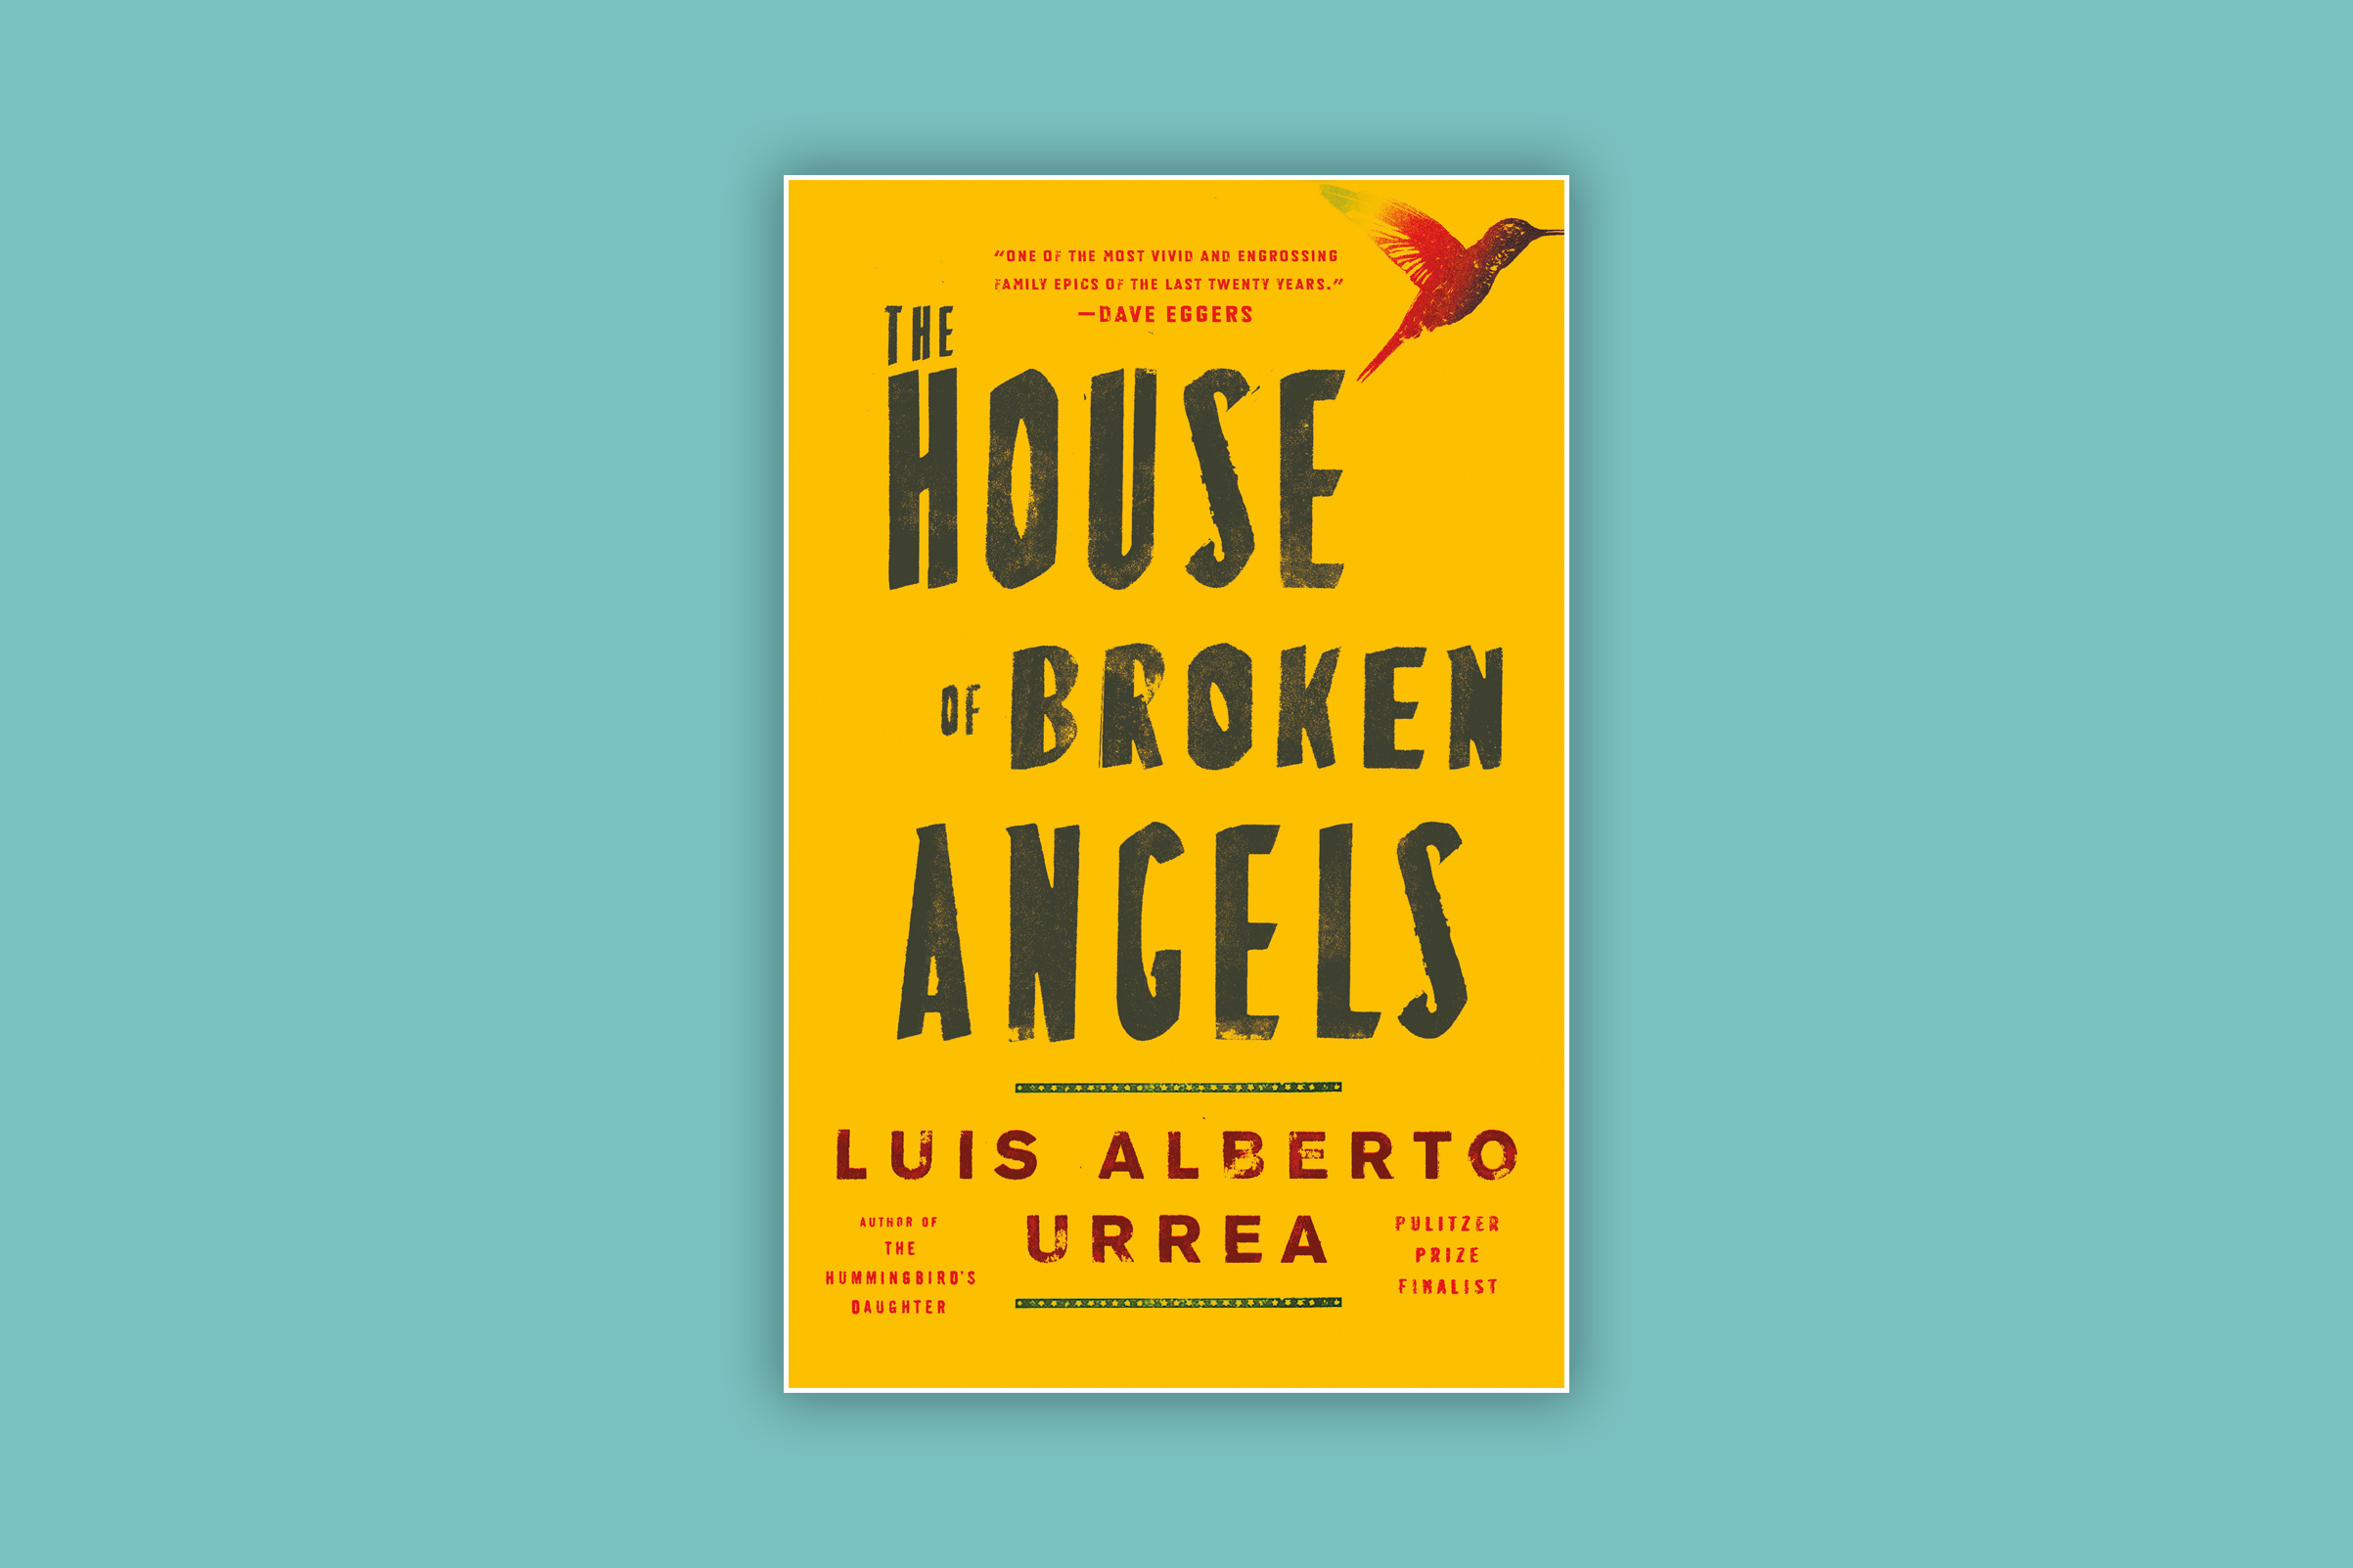 This is Urrea’s fifth novel; his nonfiction The Devil’s Highway was a Pulitzer finalist in 2005